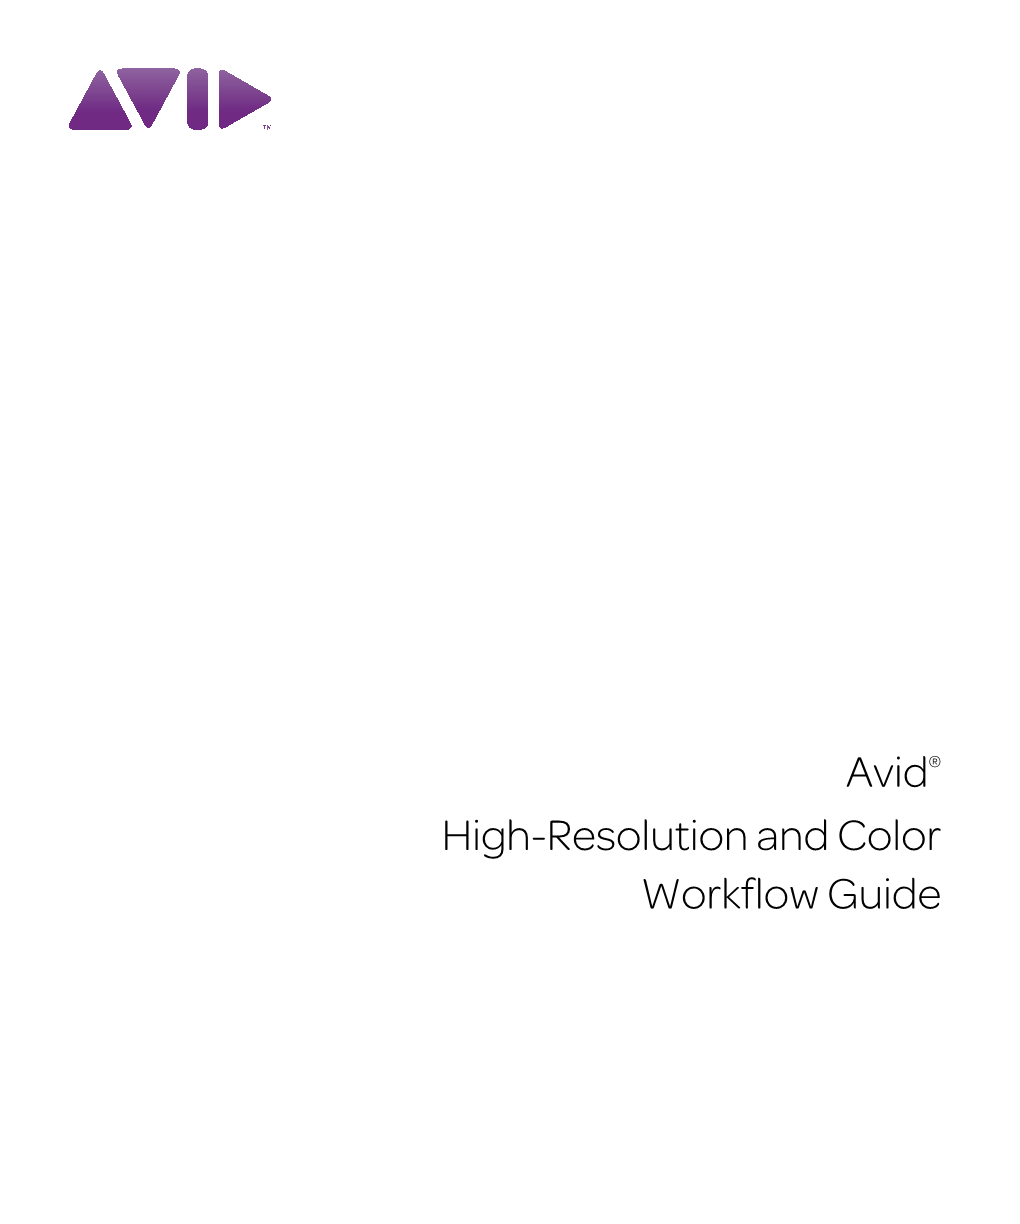 Avid High Resolution and Color Workflow Guide